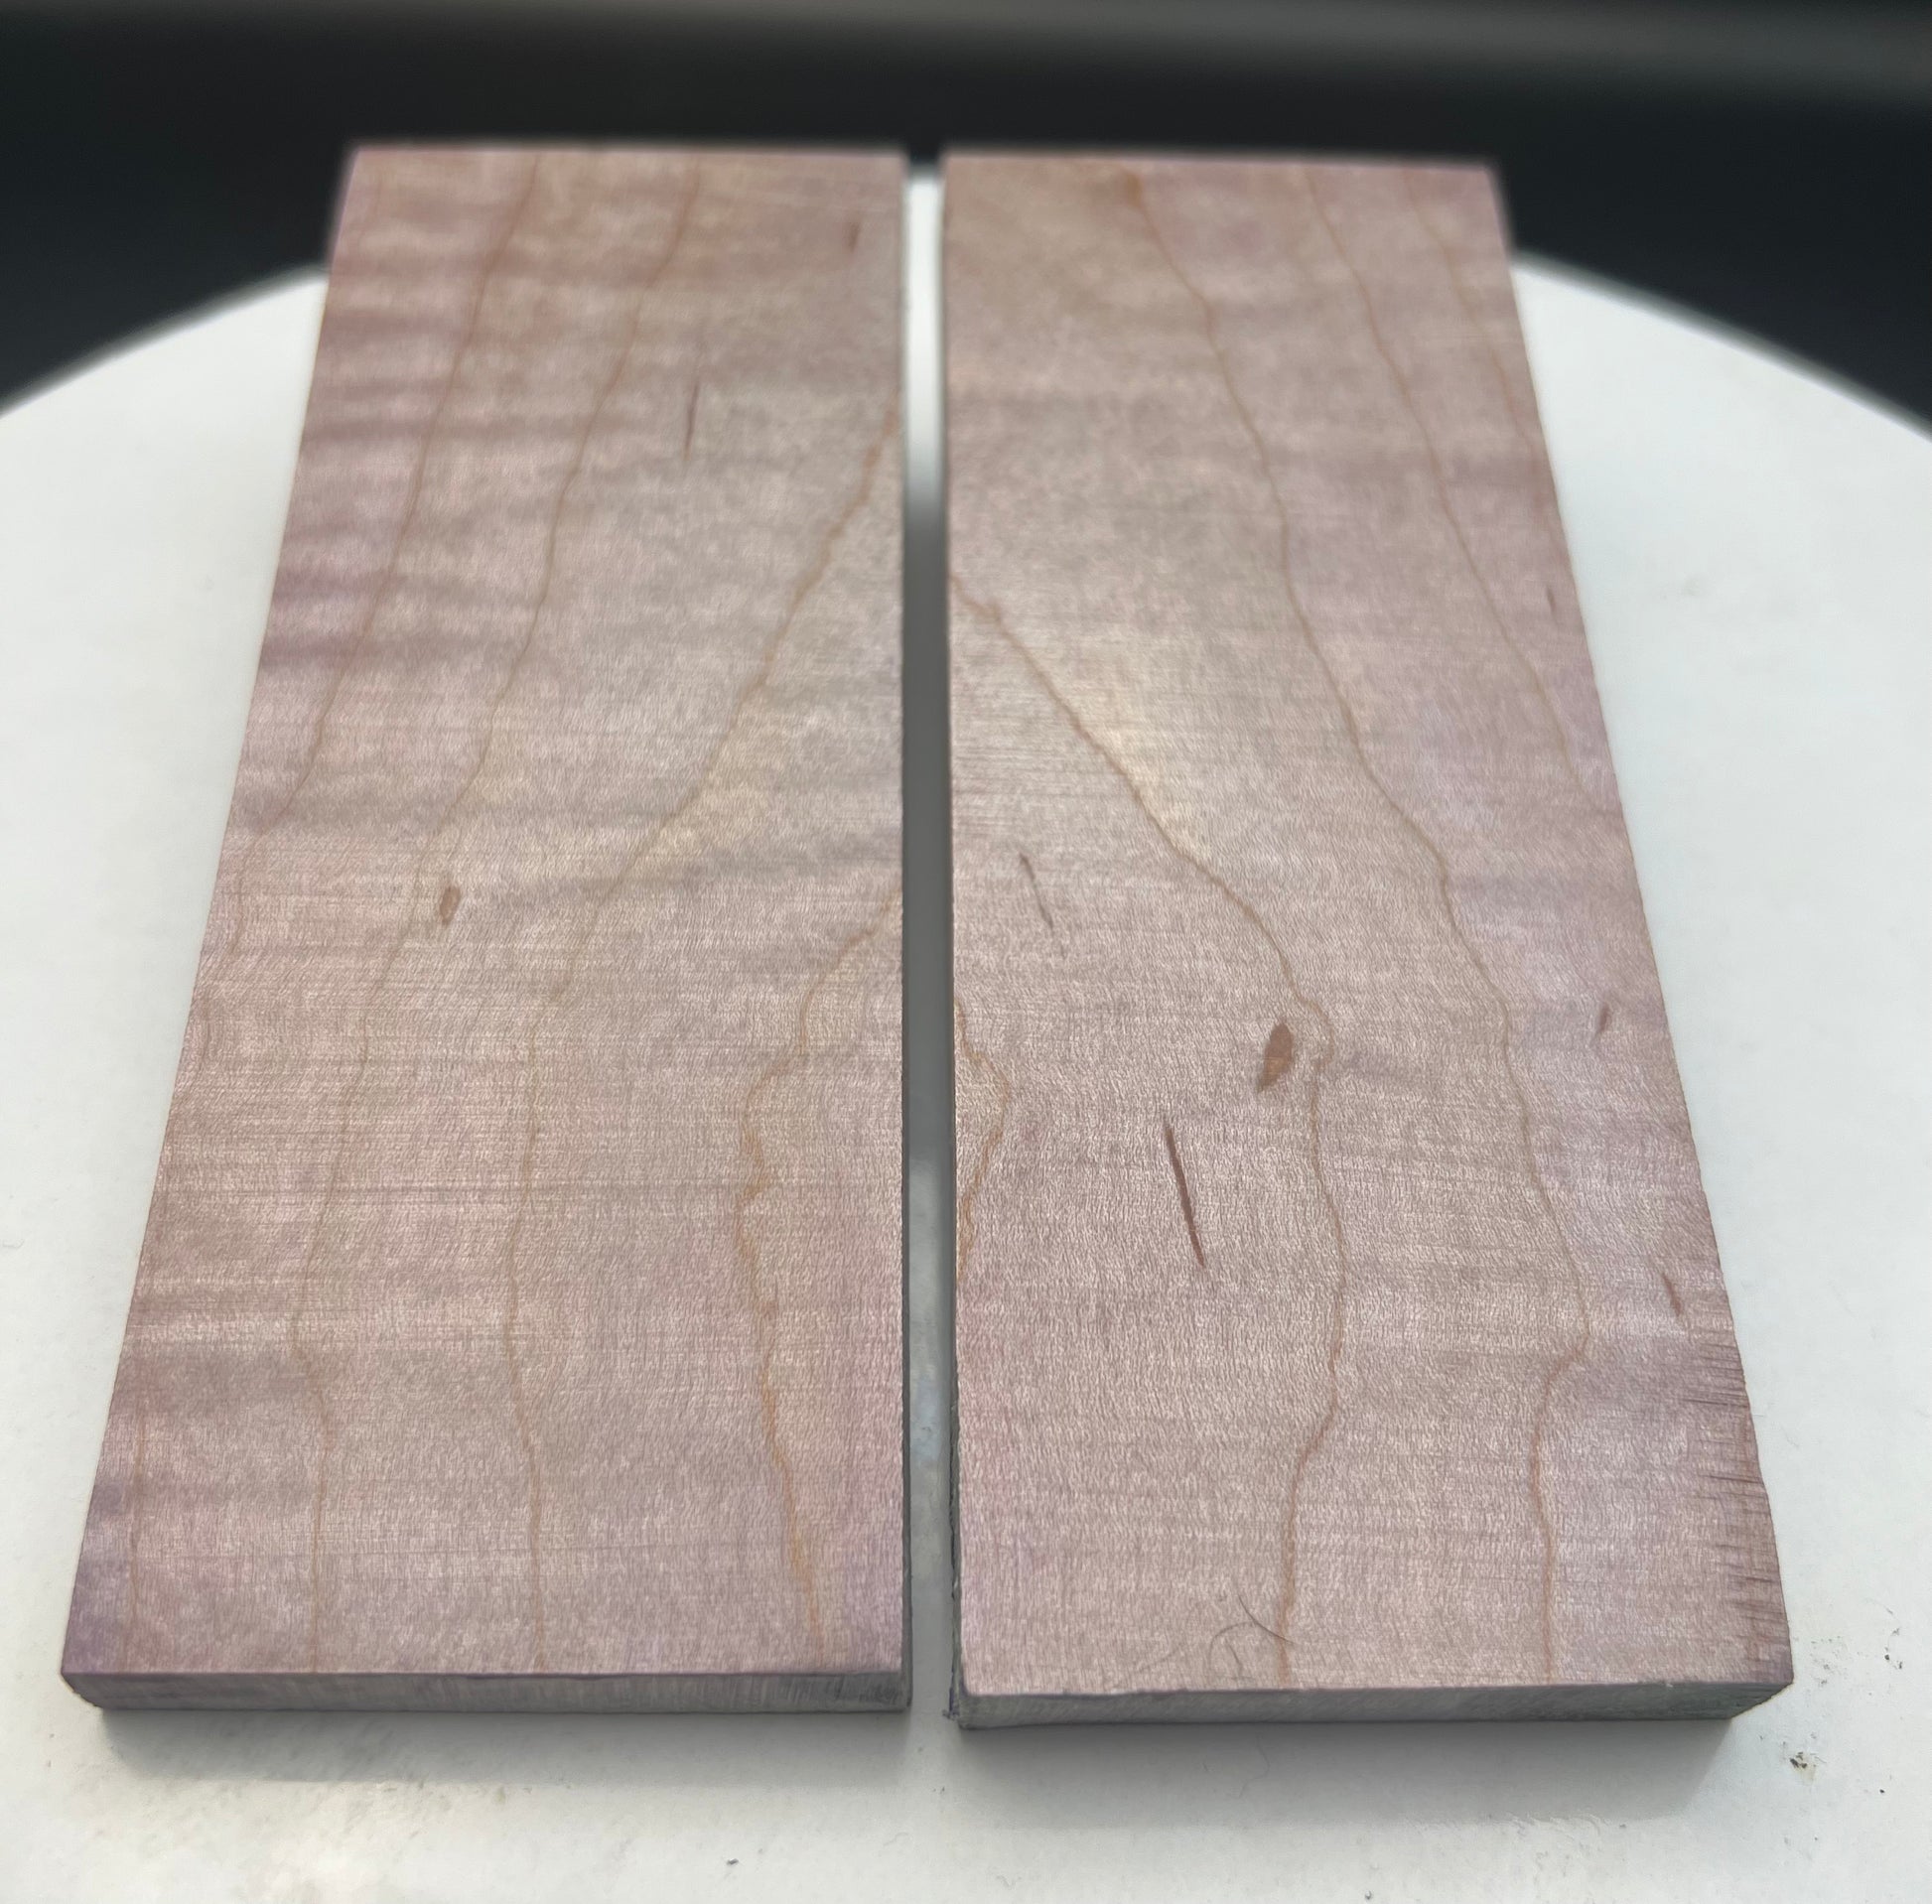 Stabilized Curly Maple knife Scales Light Pink